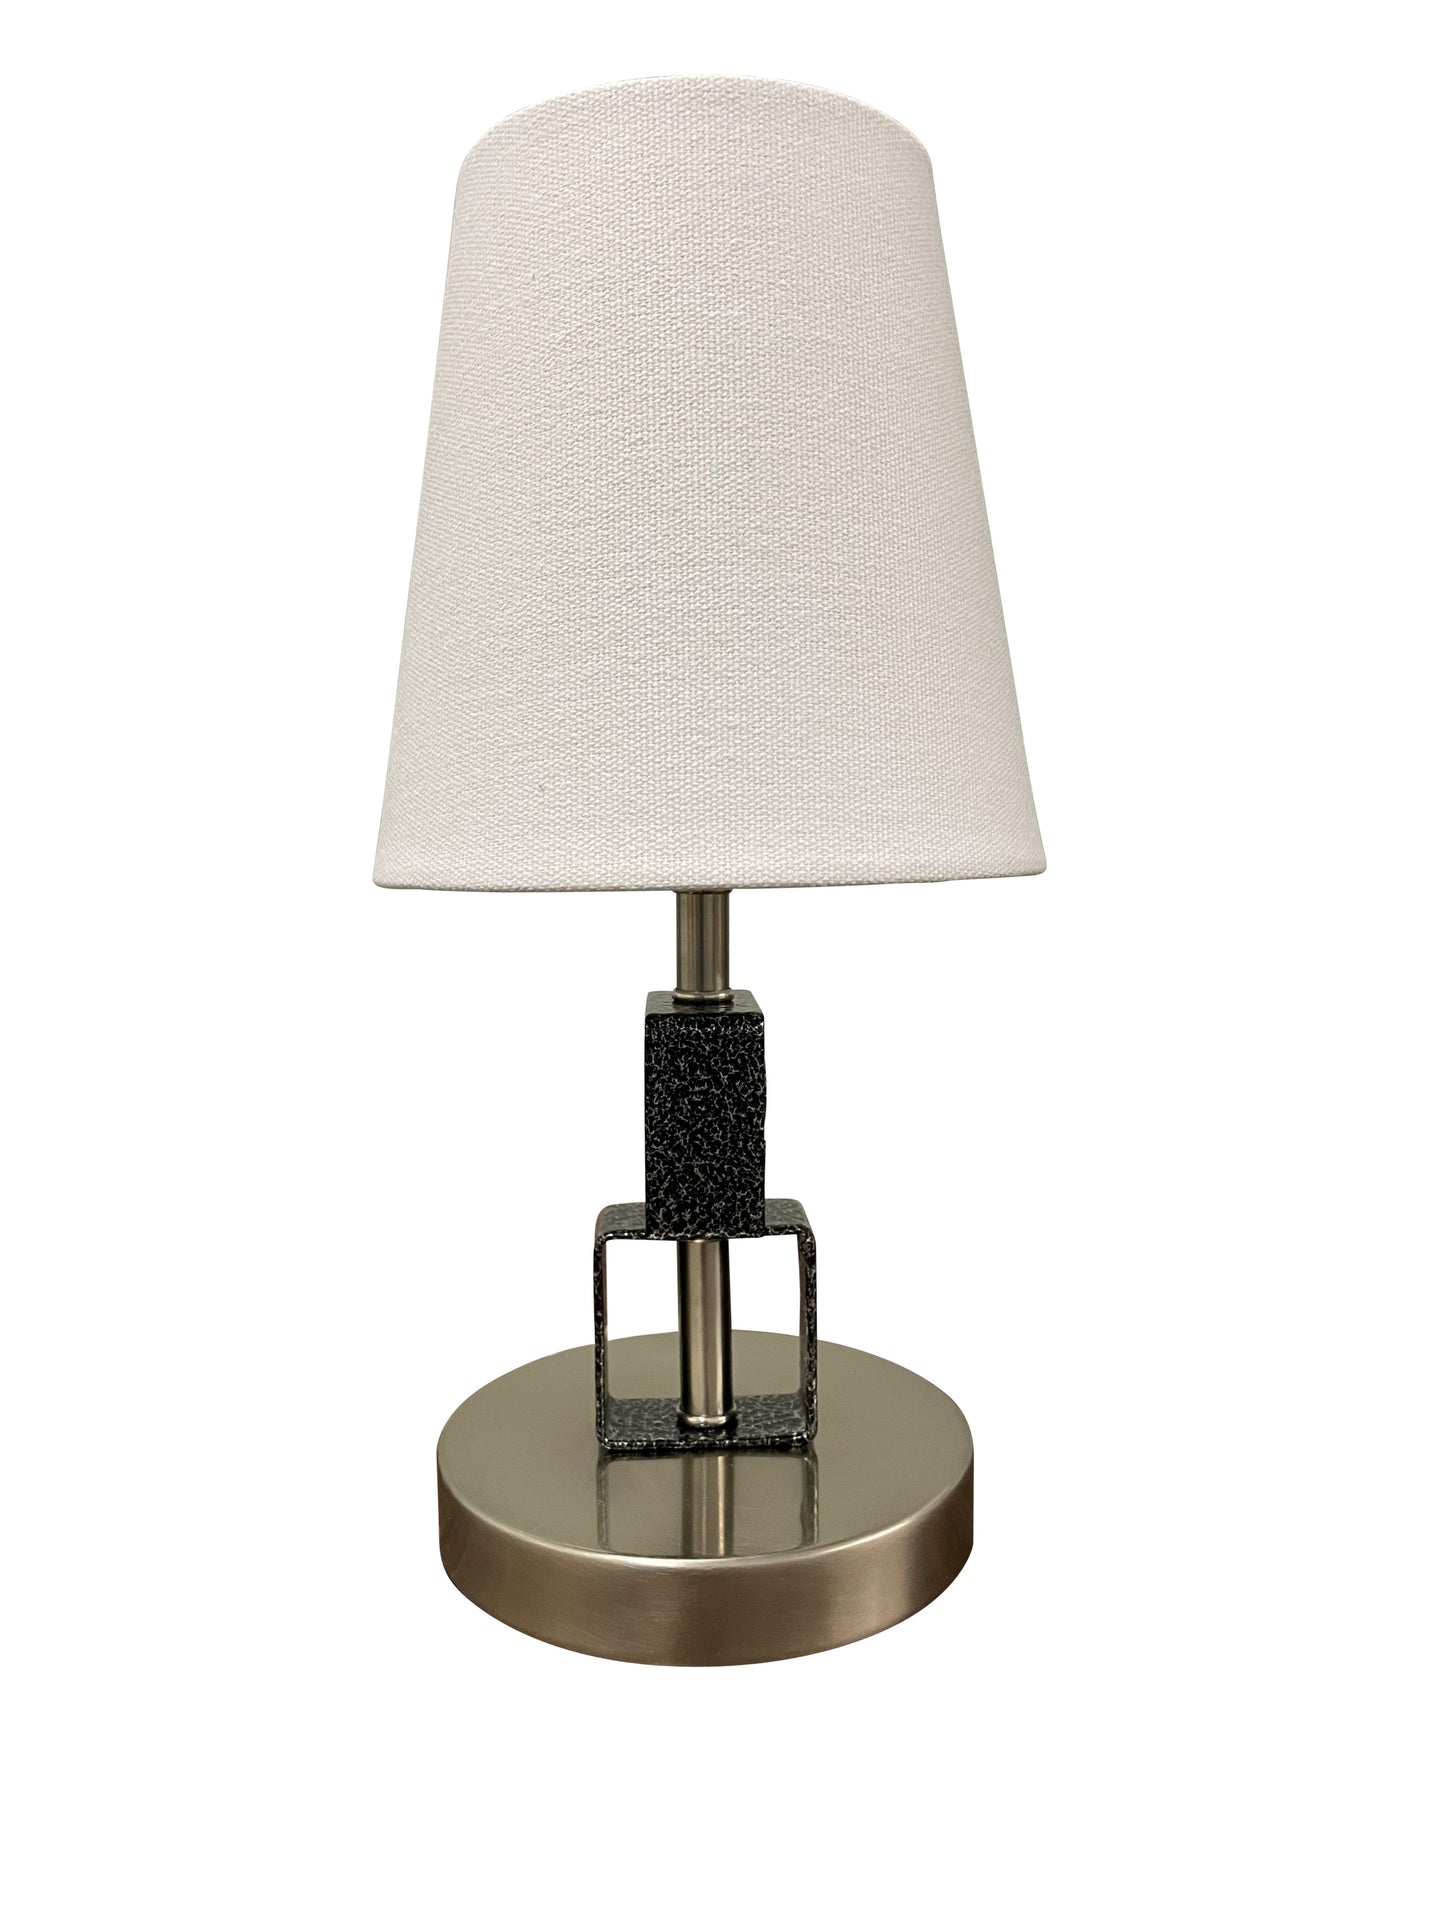 House of Troy Bryson Mini satin nickel/supreme silver accent lamp B208-SN/SS